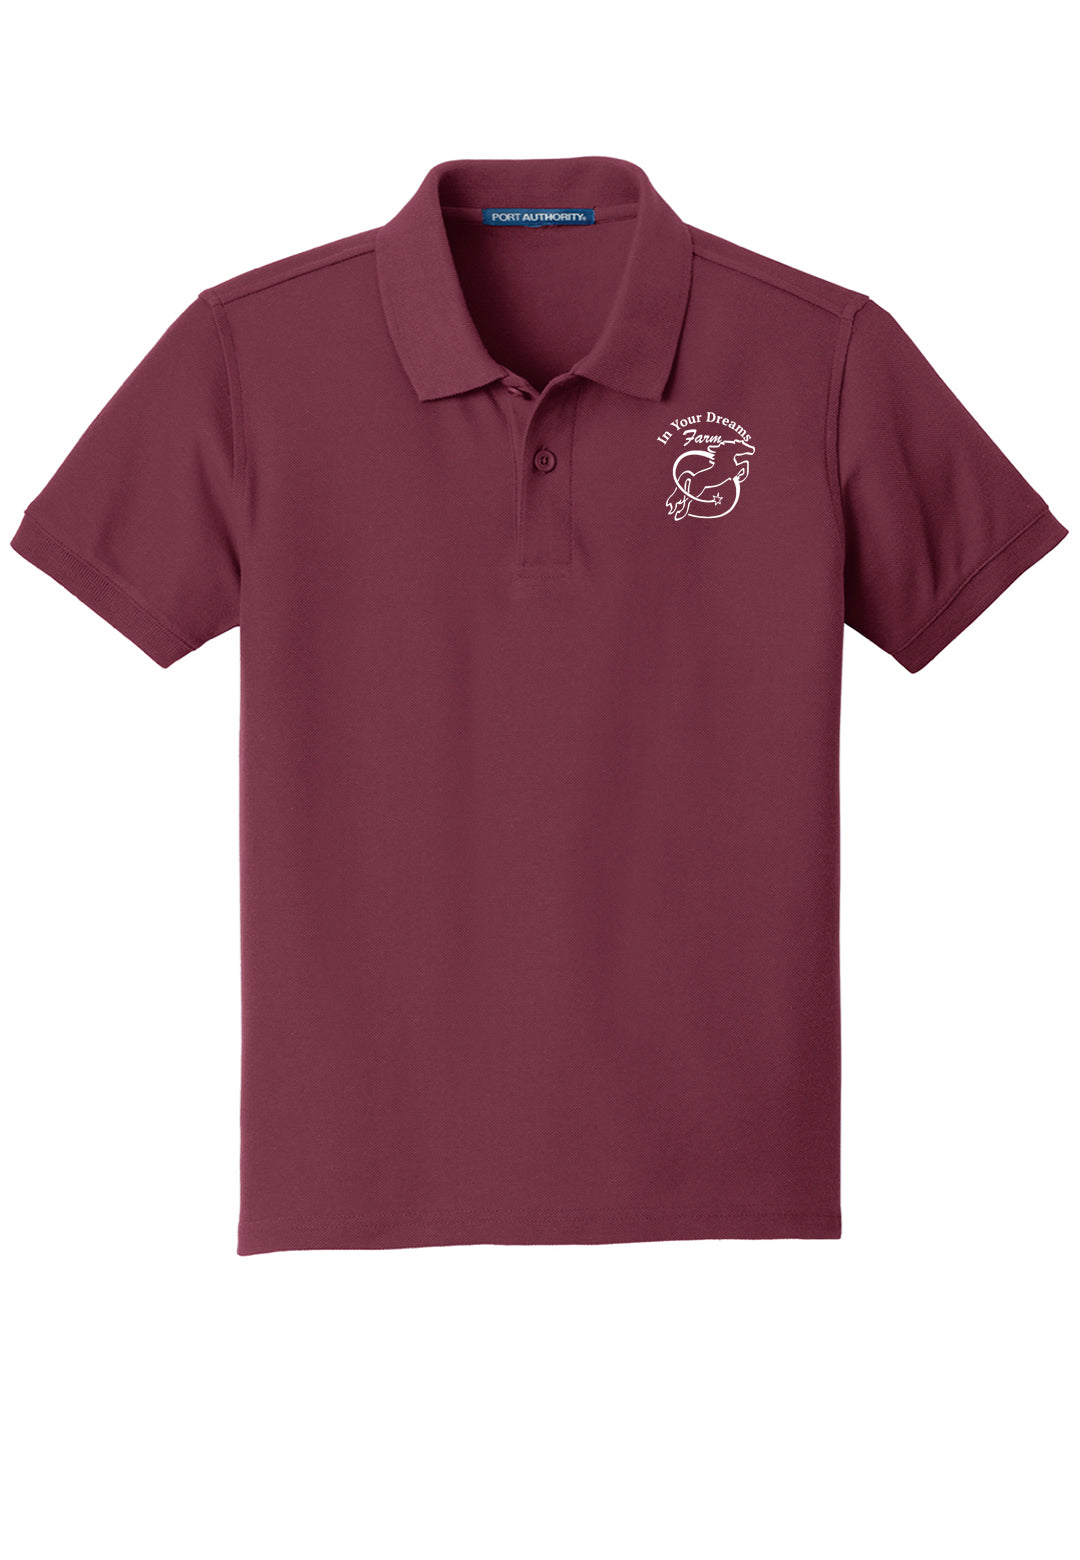 In Your Dreams Farm Youth Classic Pique Polo - Multiple Color Options